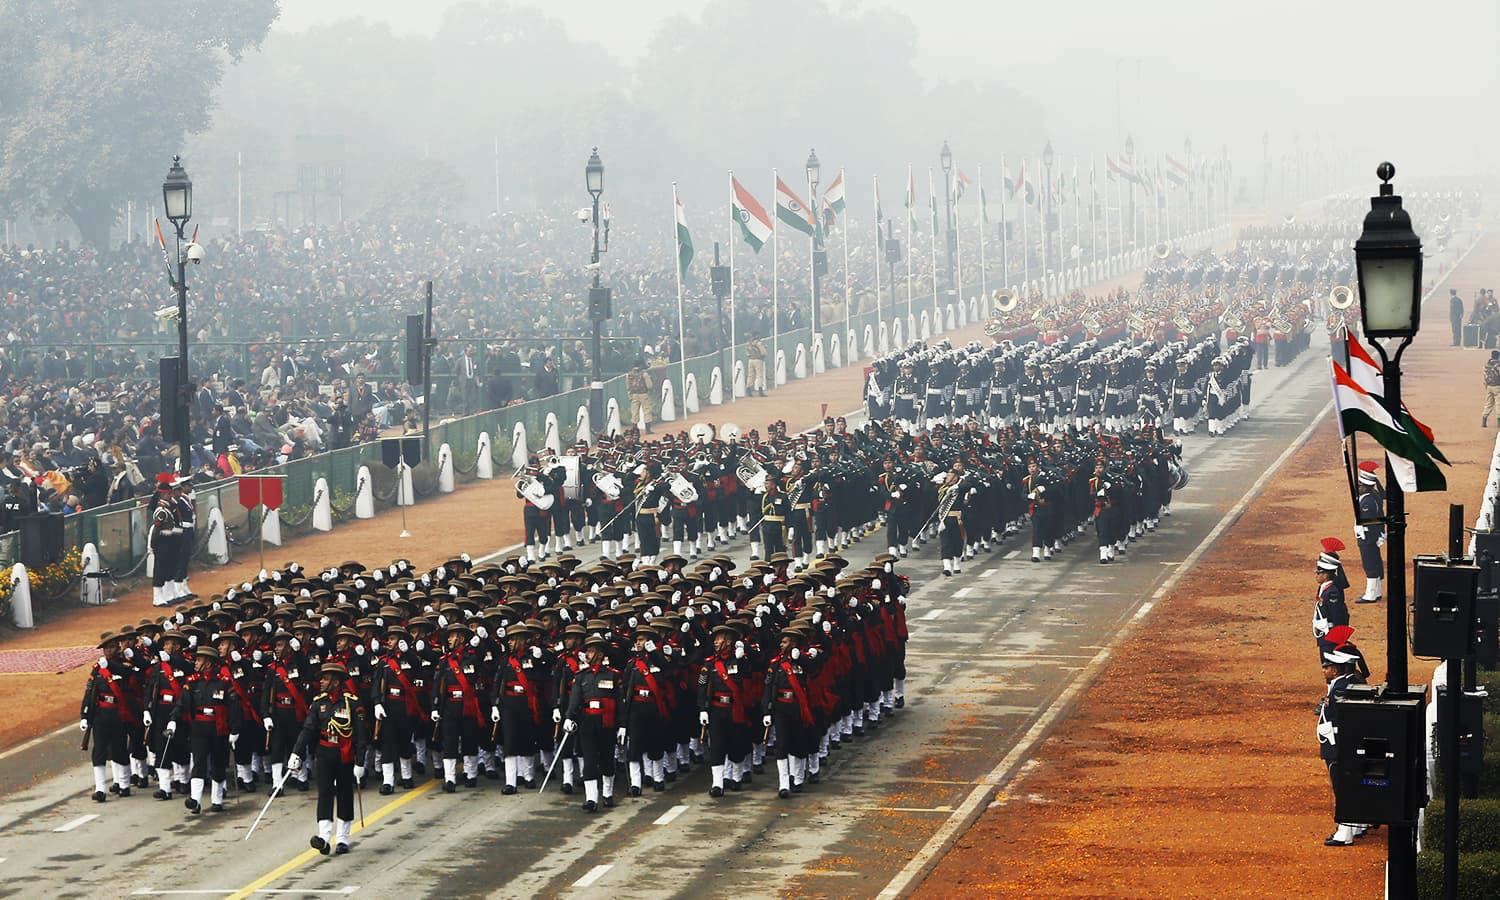 Indian soldiers march during the Republic Day parade in New Delhi, India January 26, 2016. REUTERS/Adnan Abidi